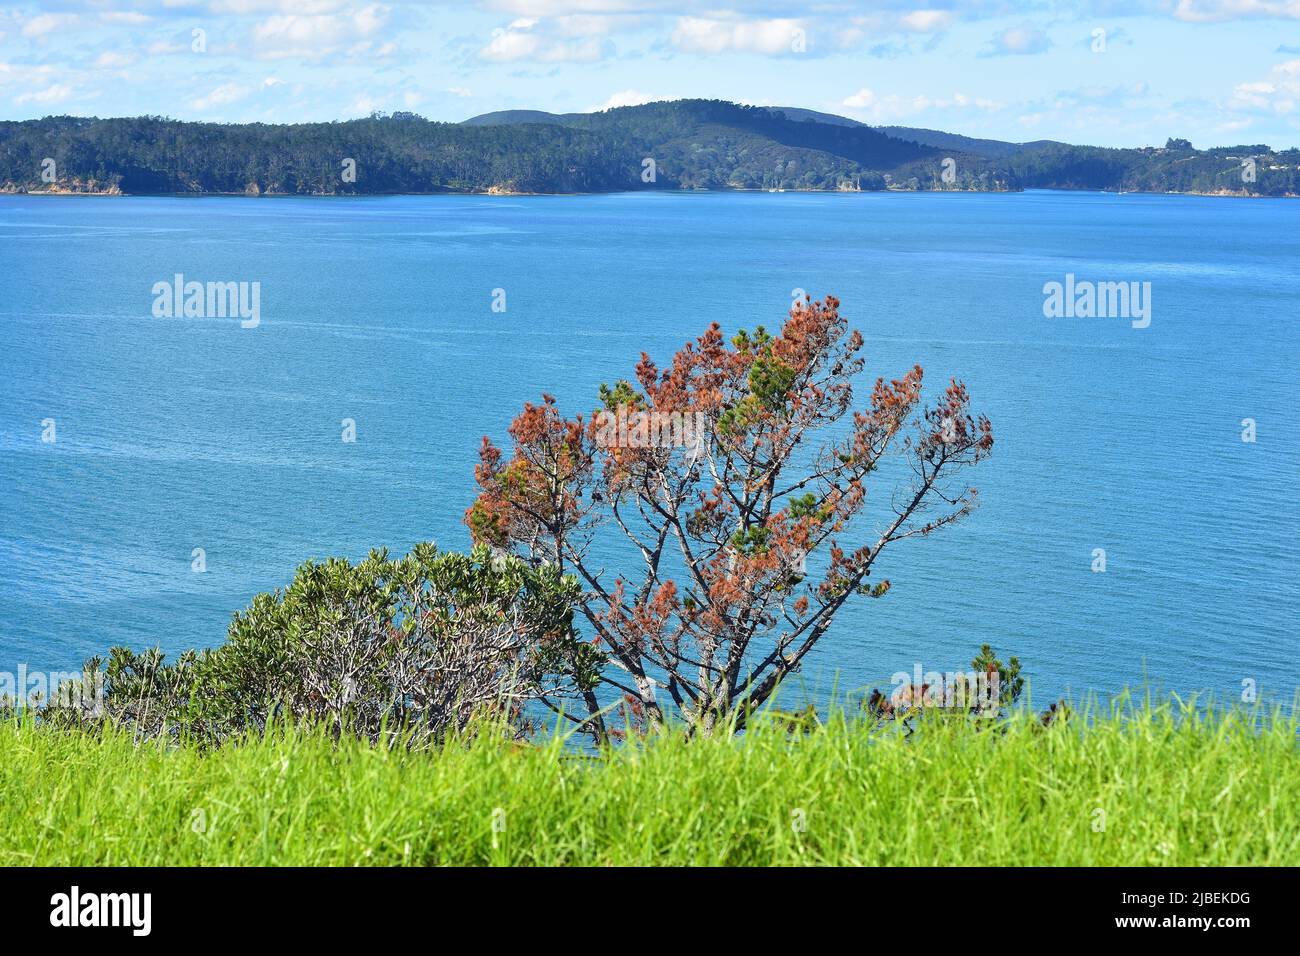 View of southwestern side of Kawau Island from Scandrett Regional Park with partly dry conifer tree in foreground. Location: Mahurangi East New Zealan Stock Photo